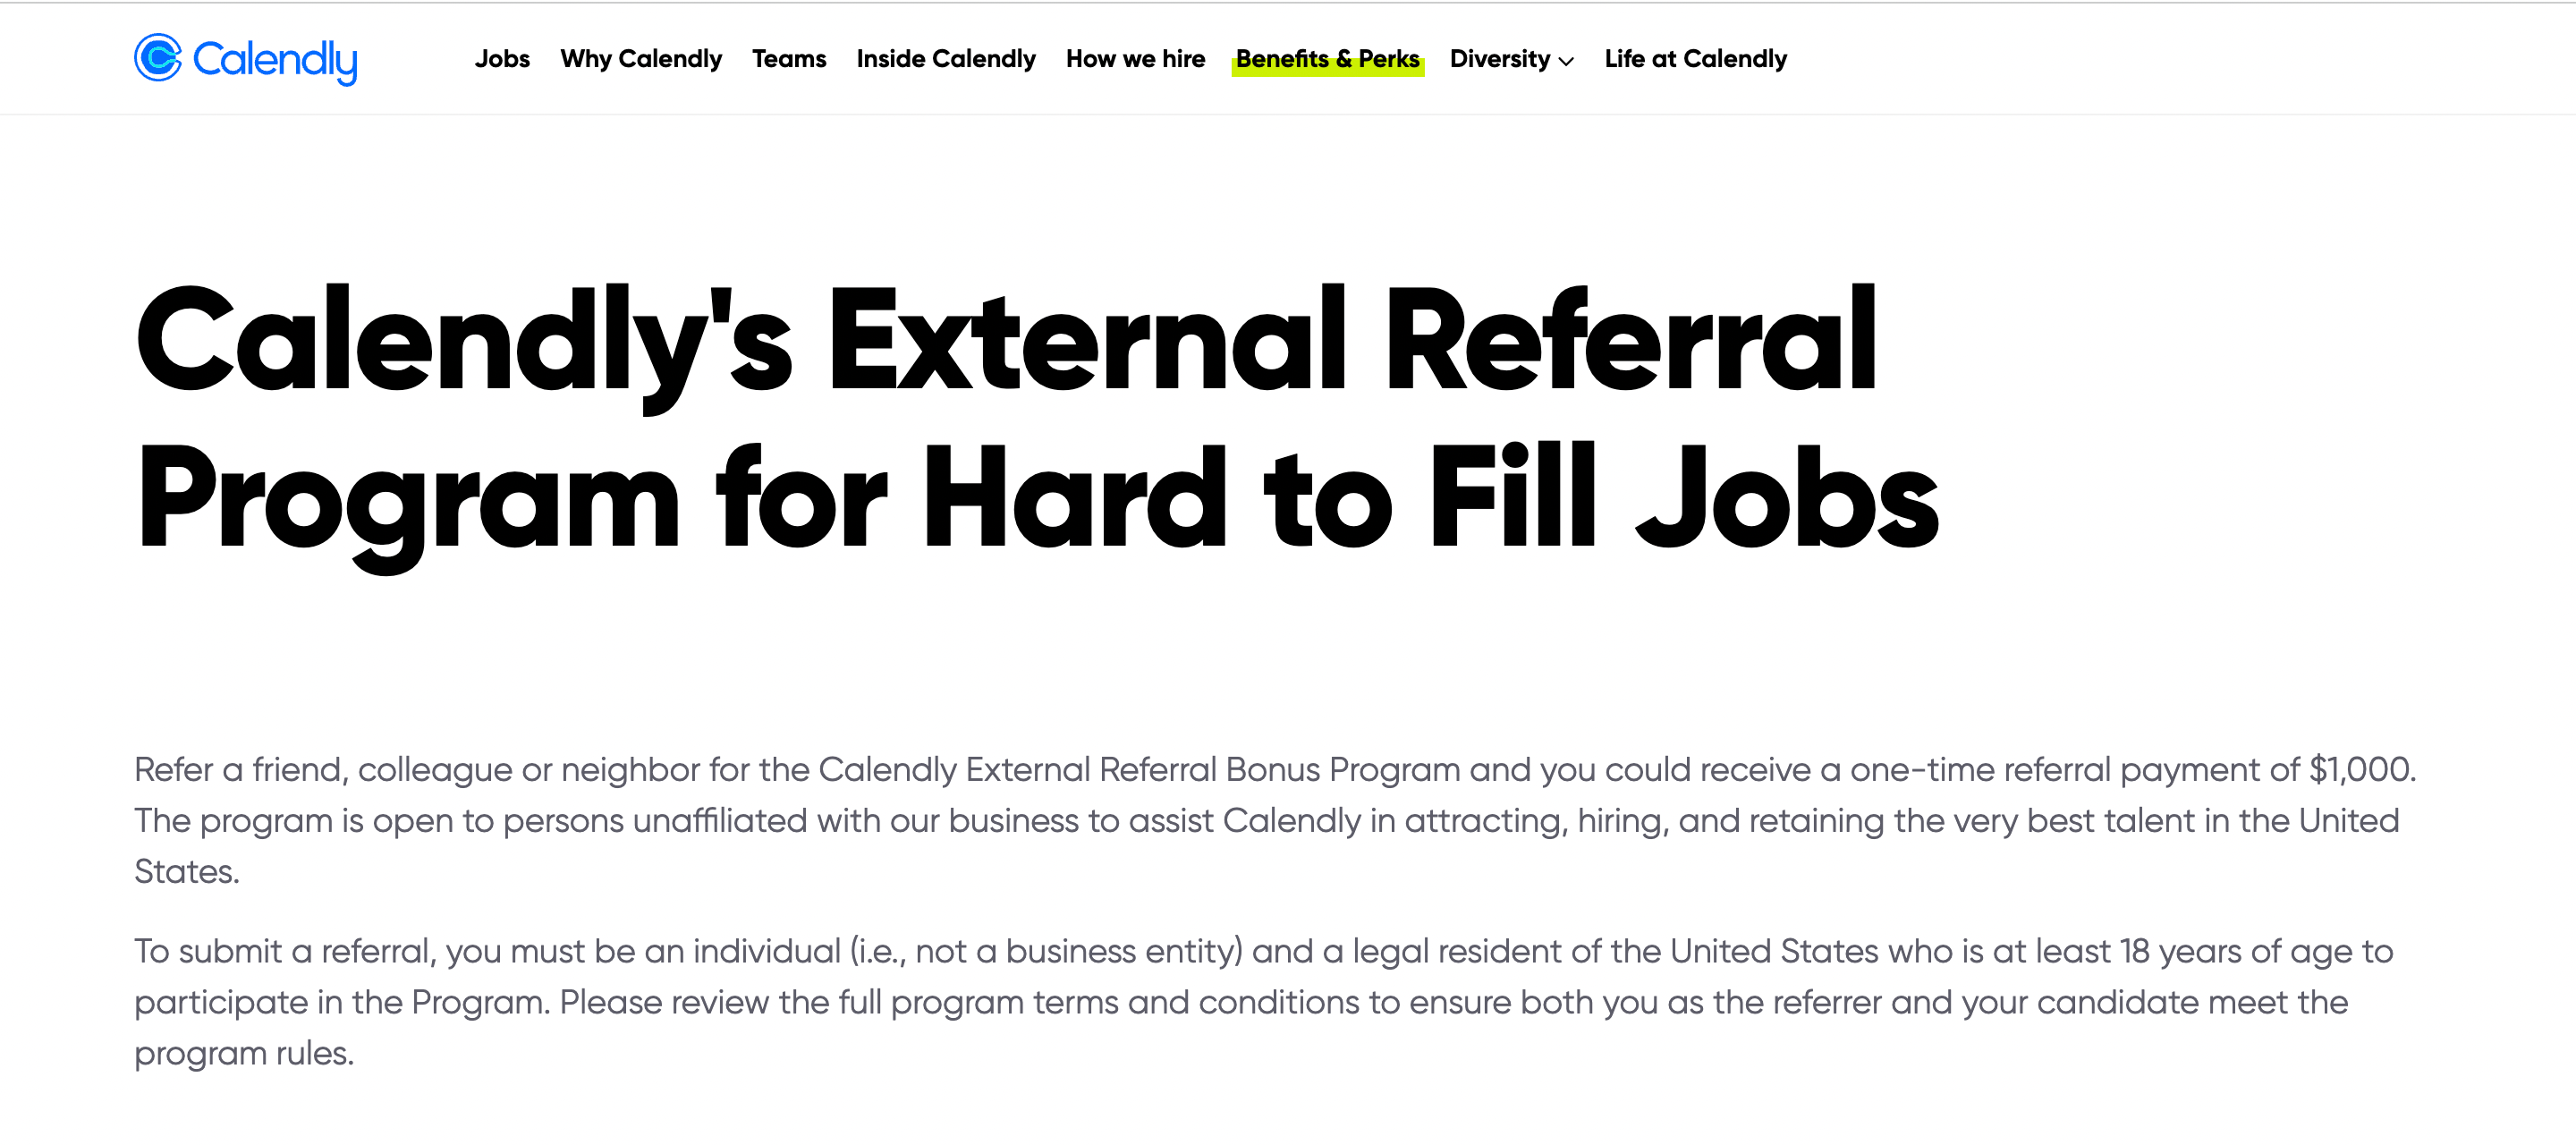 Calendly offers a one-time referral bonus of $1,000 for external referrals for hard-to-fill jobs